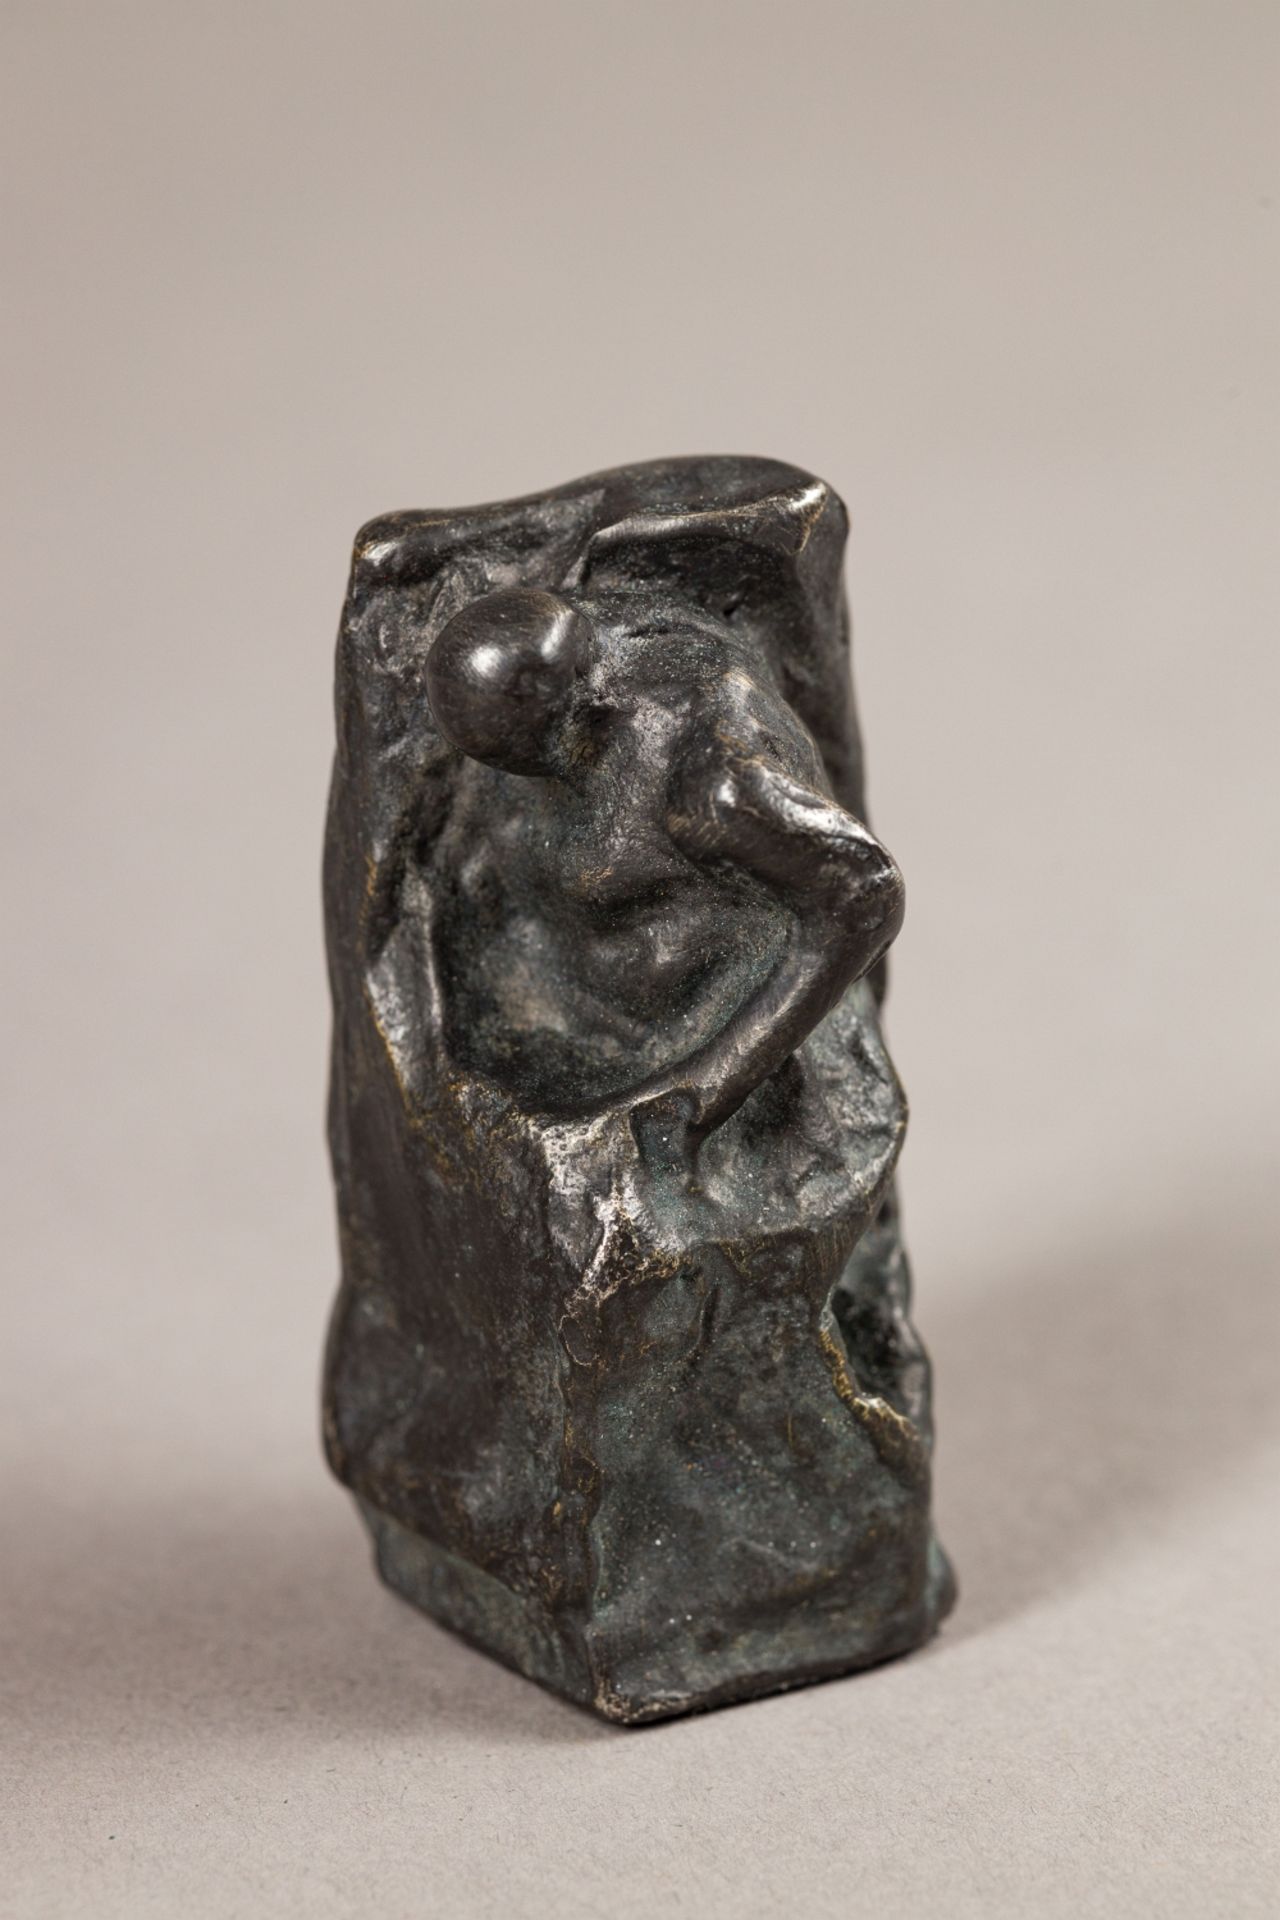 Hrdlicka, Alfred (1928 - 2009) Study to Anthropos, 1981 Silver-plated Precious Tin, patinated - Image 3 of 4